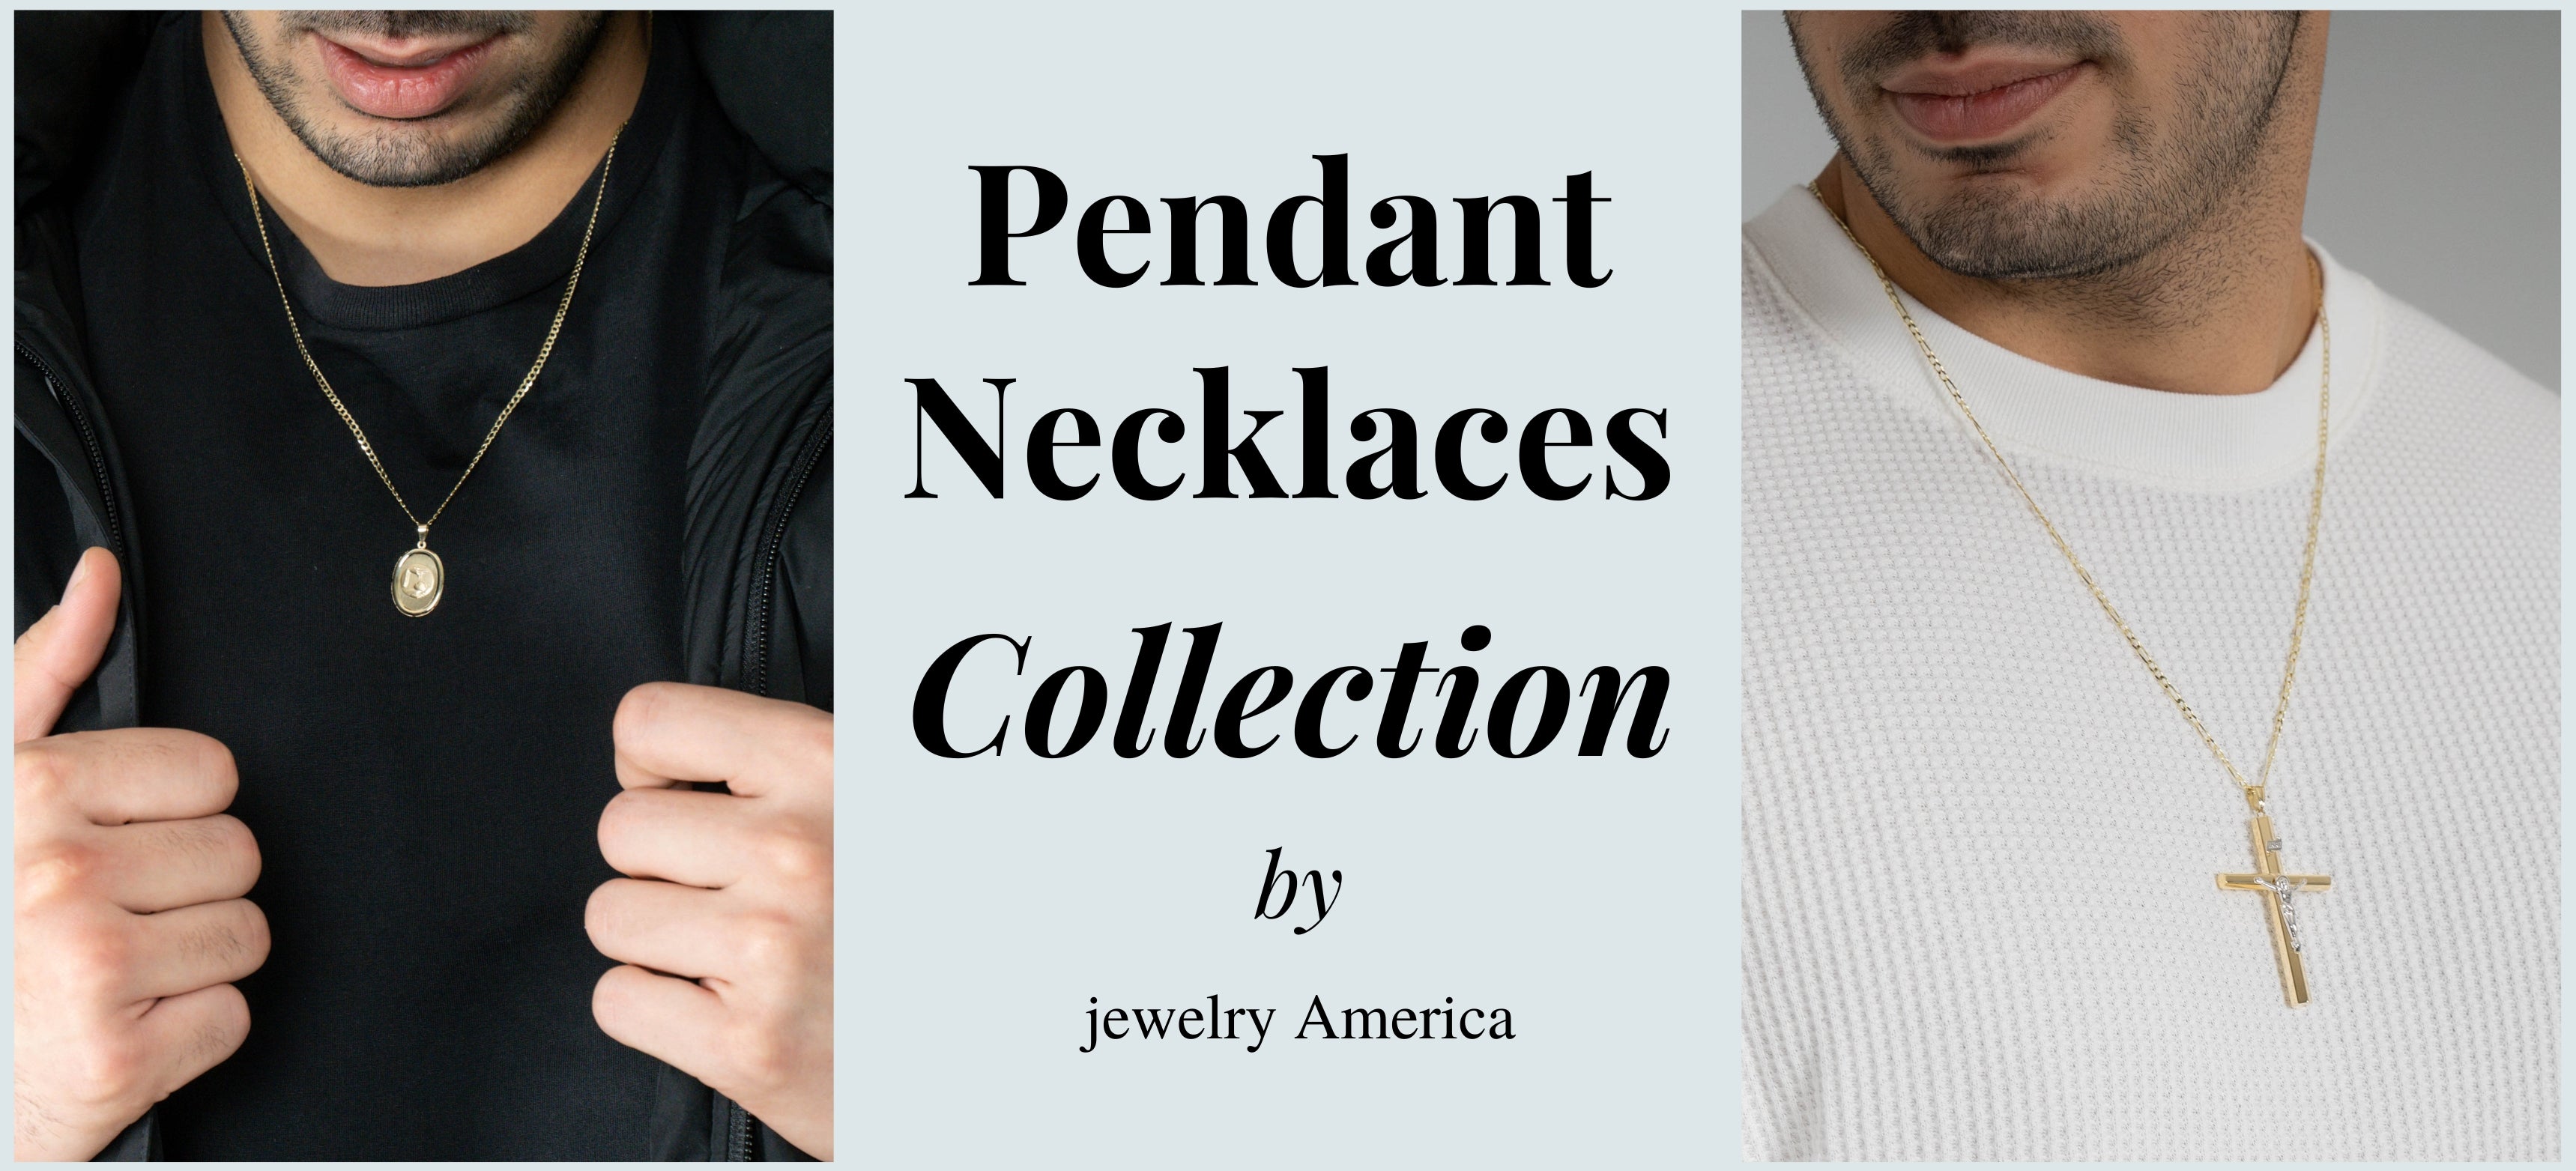 What is a Pendant Necklace?